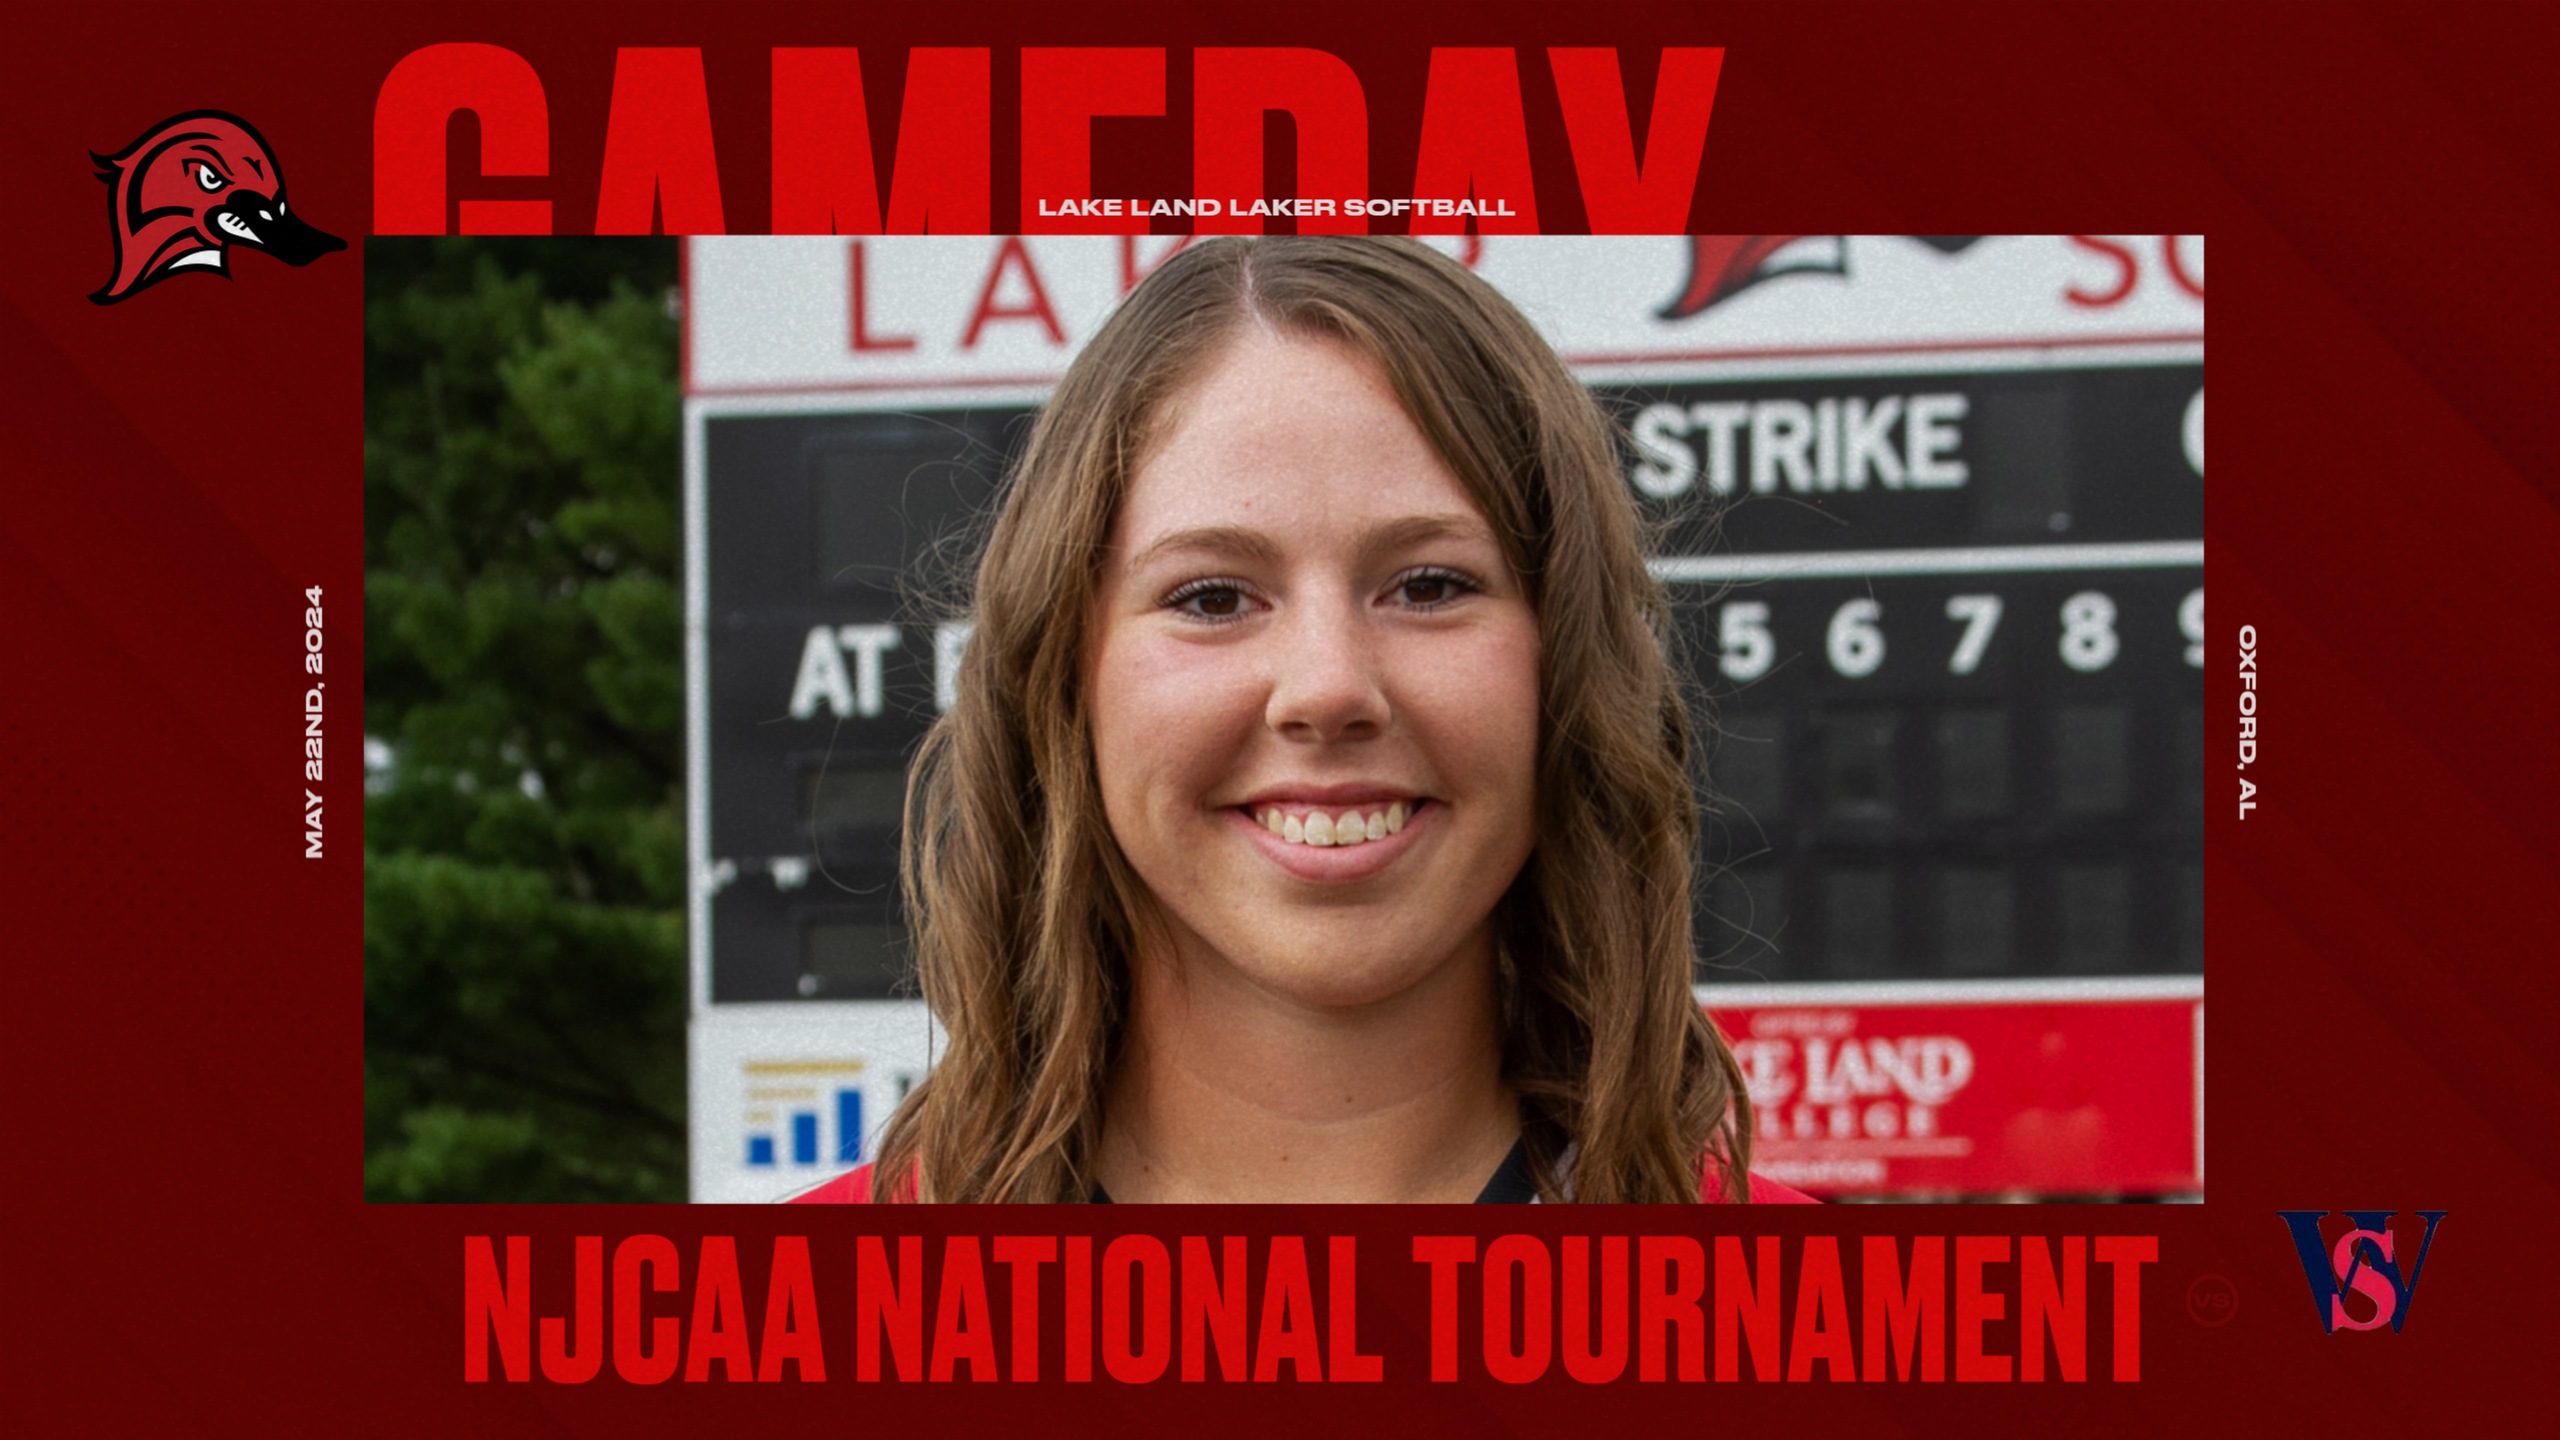 Lakers take on Walters State @11am